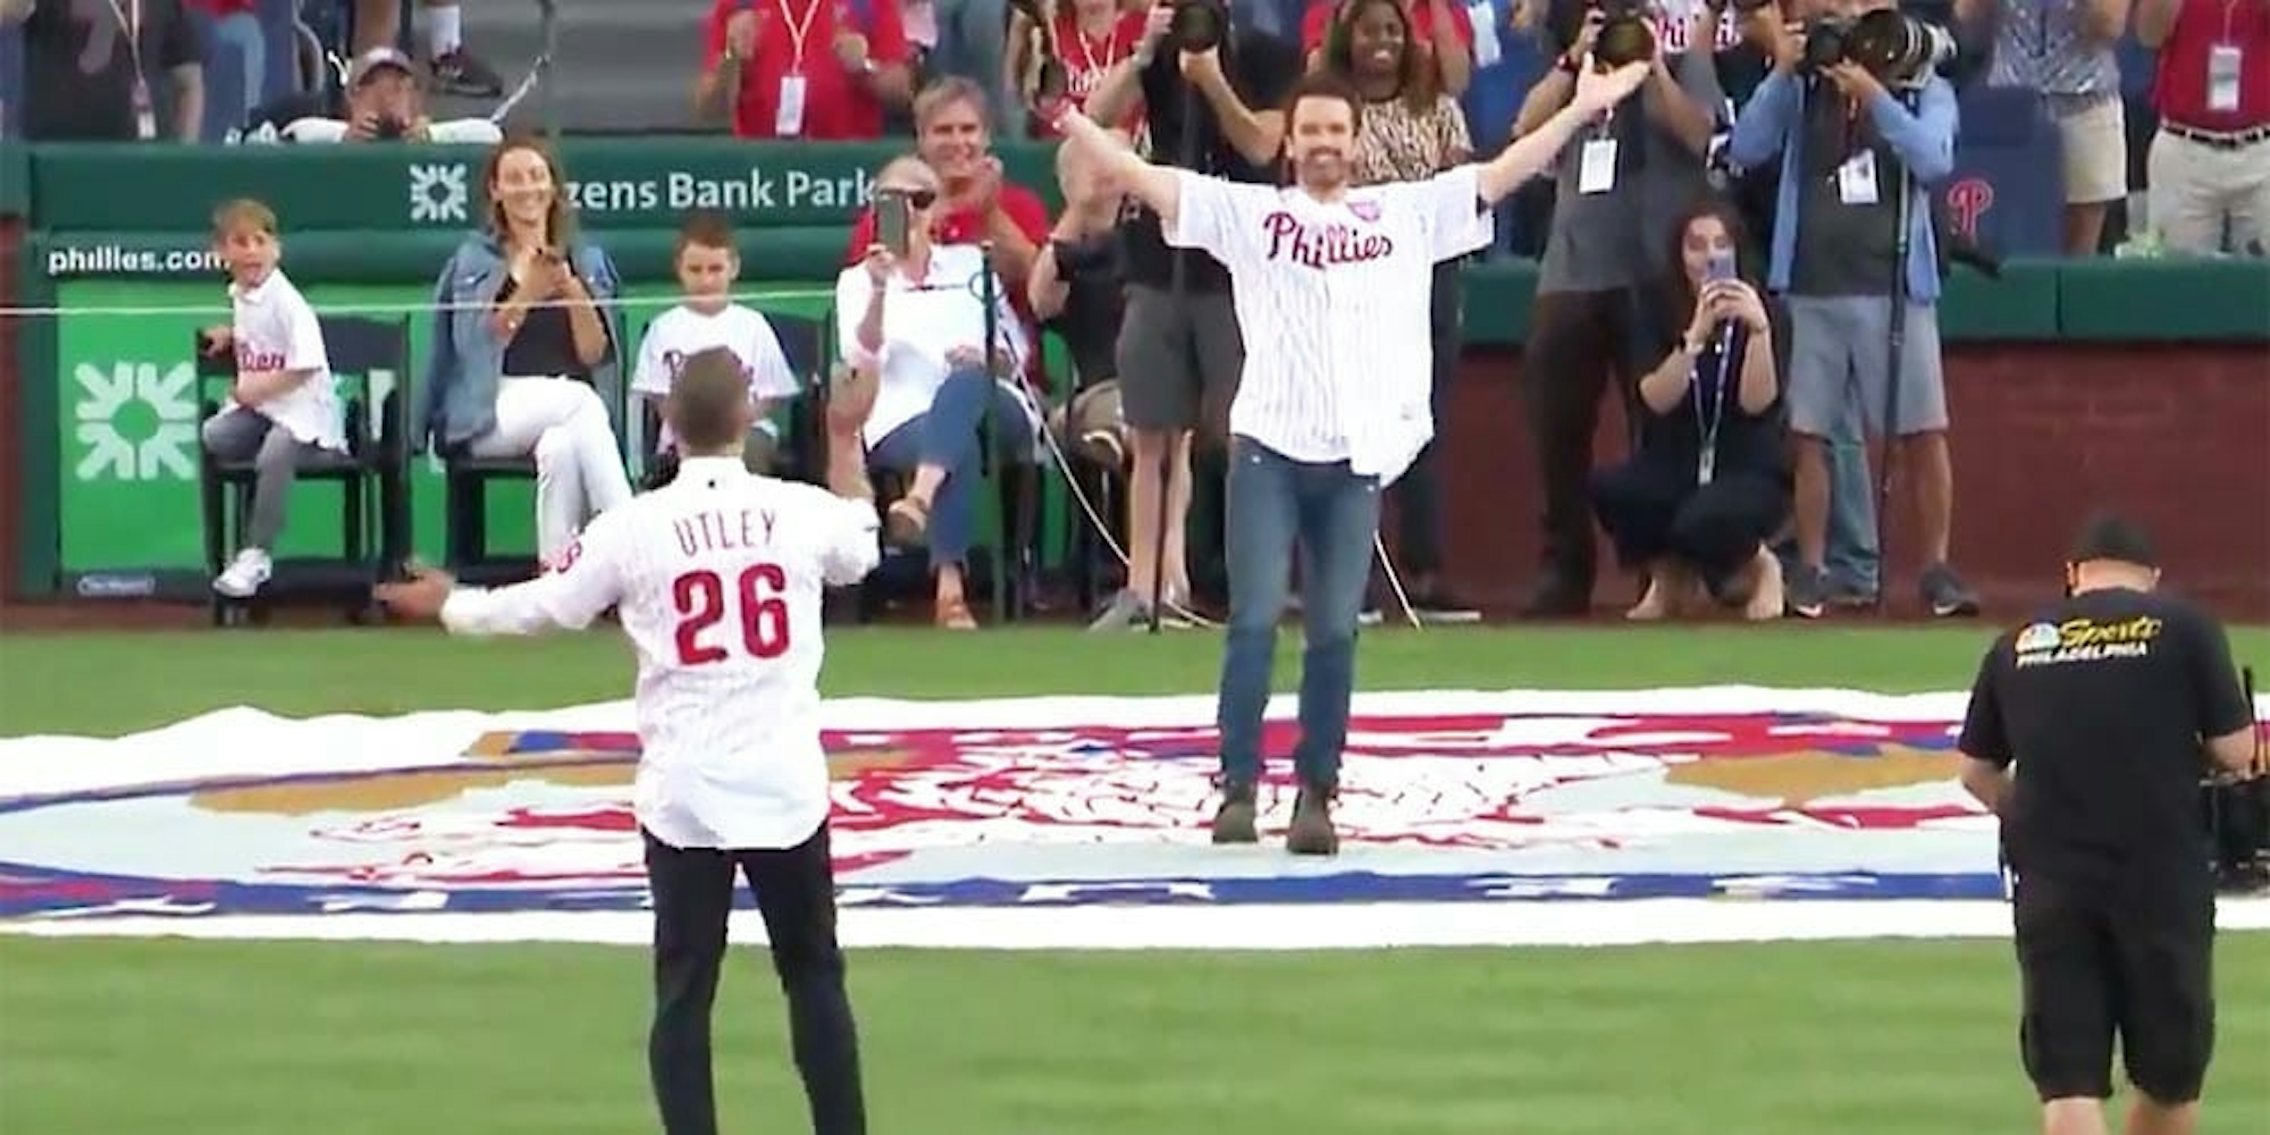 Mac From It's Always Sunny Catches Chase Utley's First Pitch